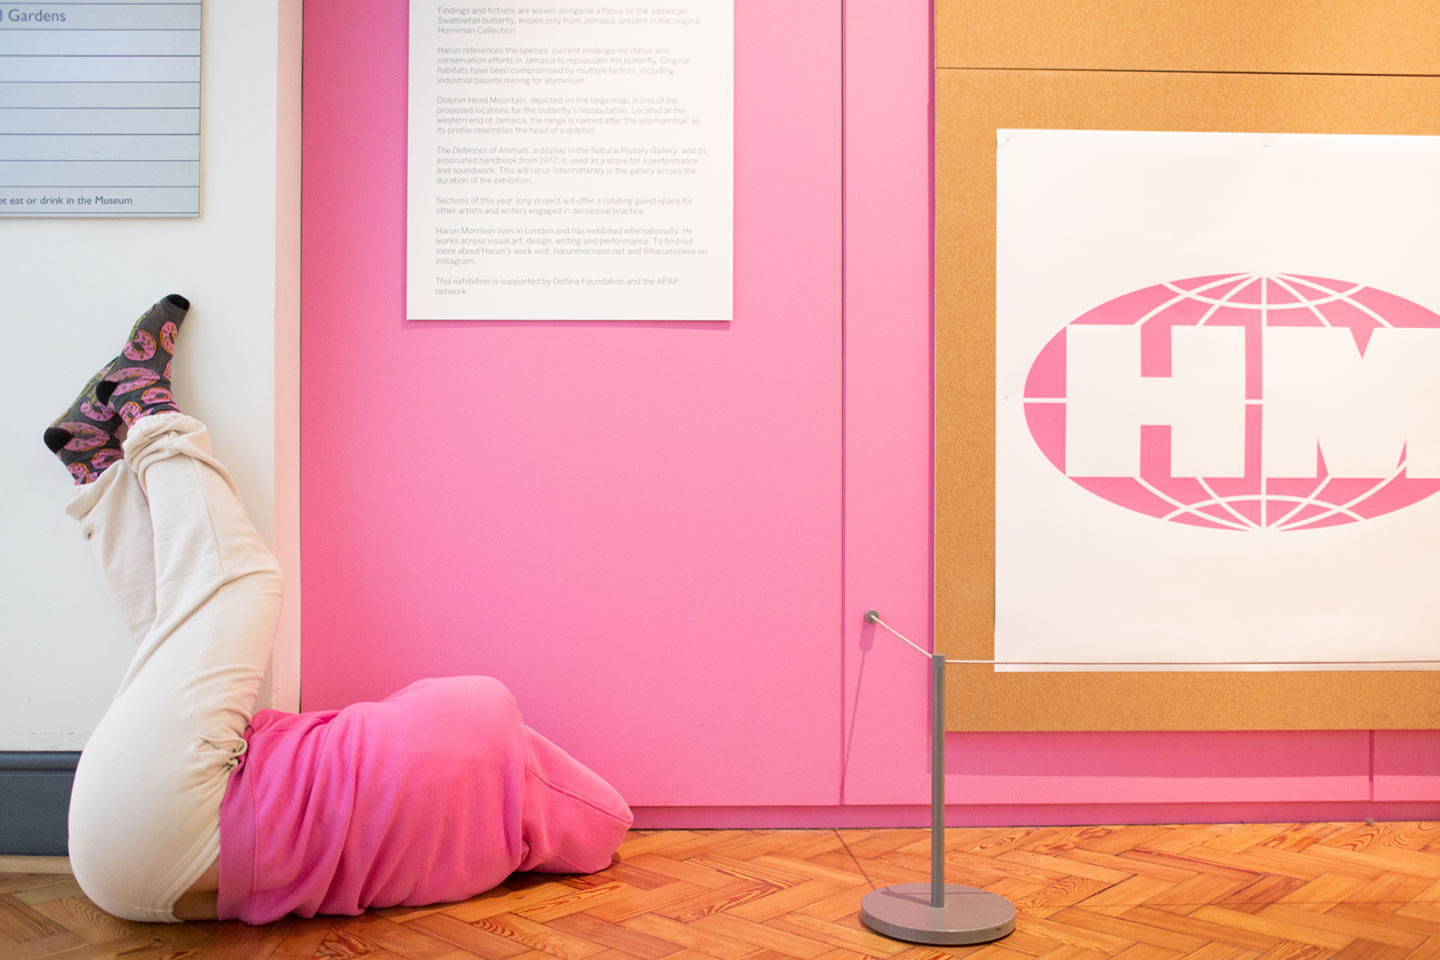 Performer lies on the floor with legs up on a wall. They wear a pink hoodie, which matches the wall.